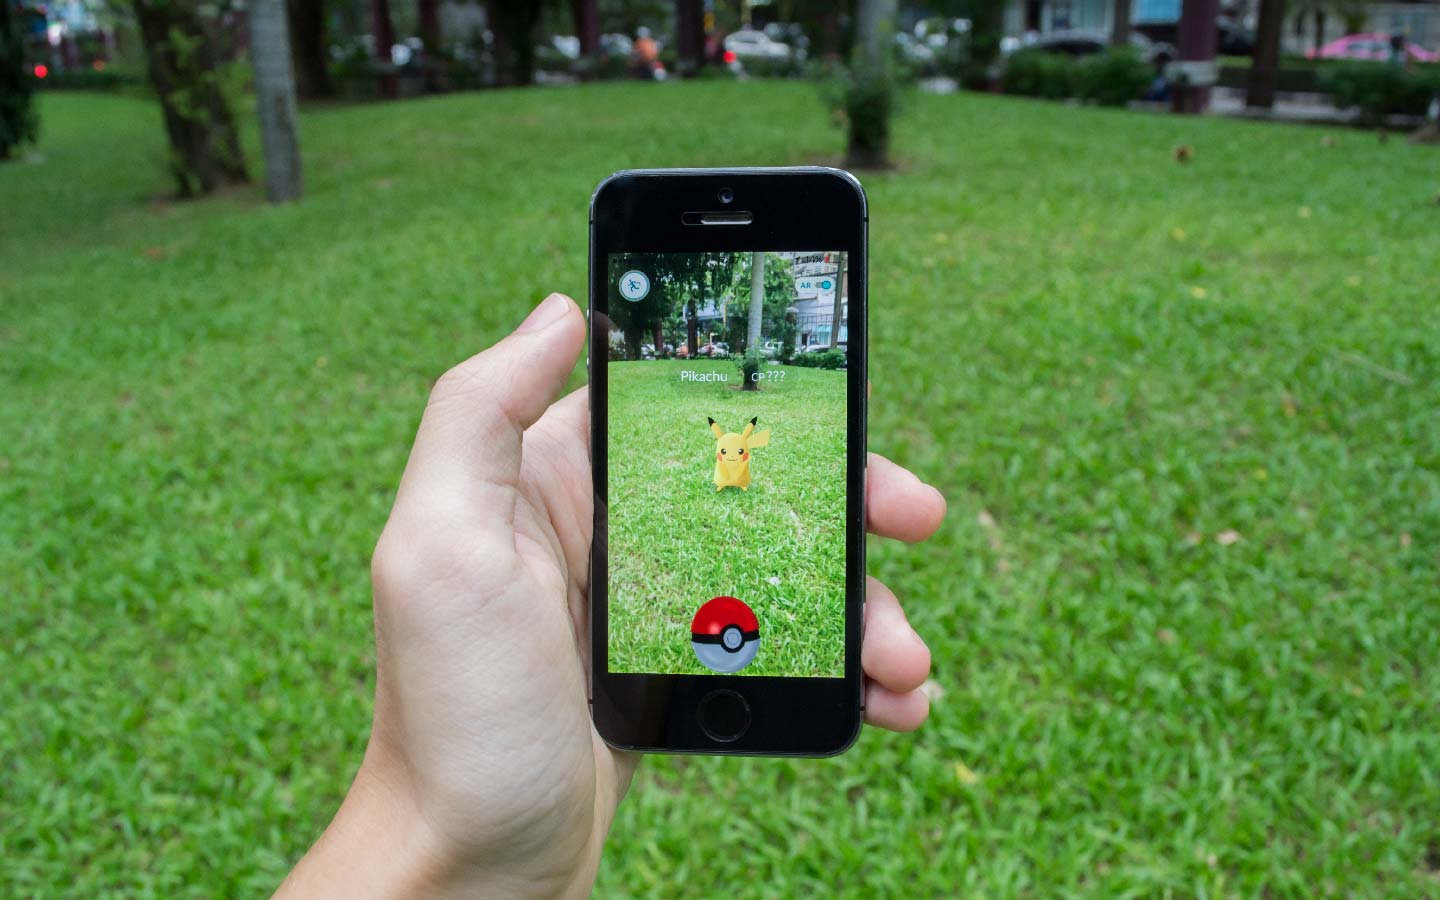 Pokemon GO is the most popular application of augmented reality